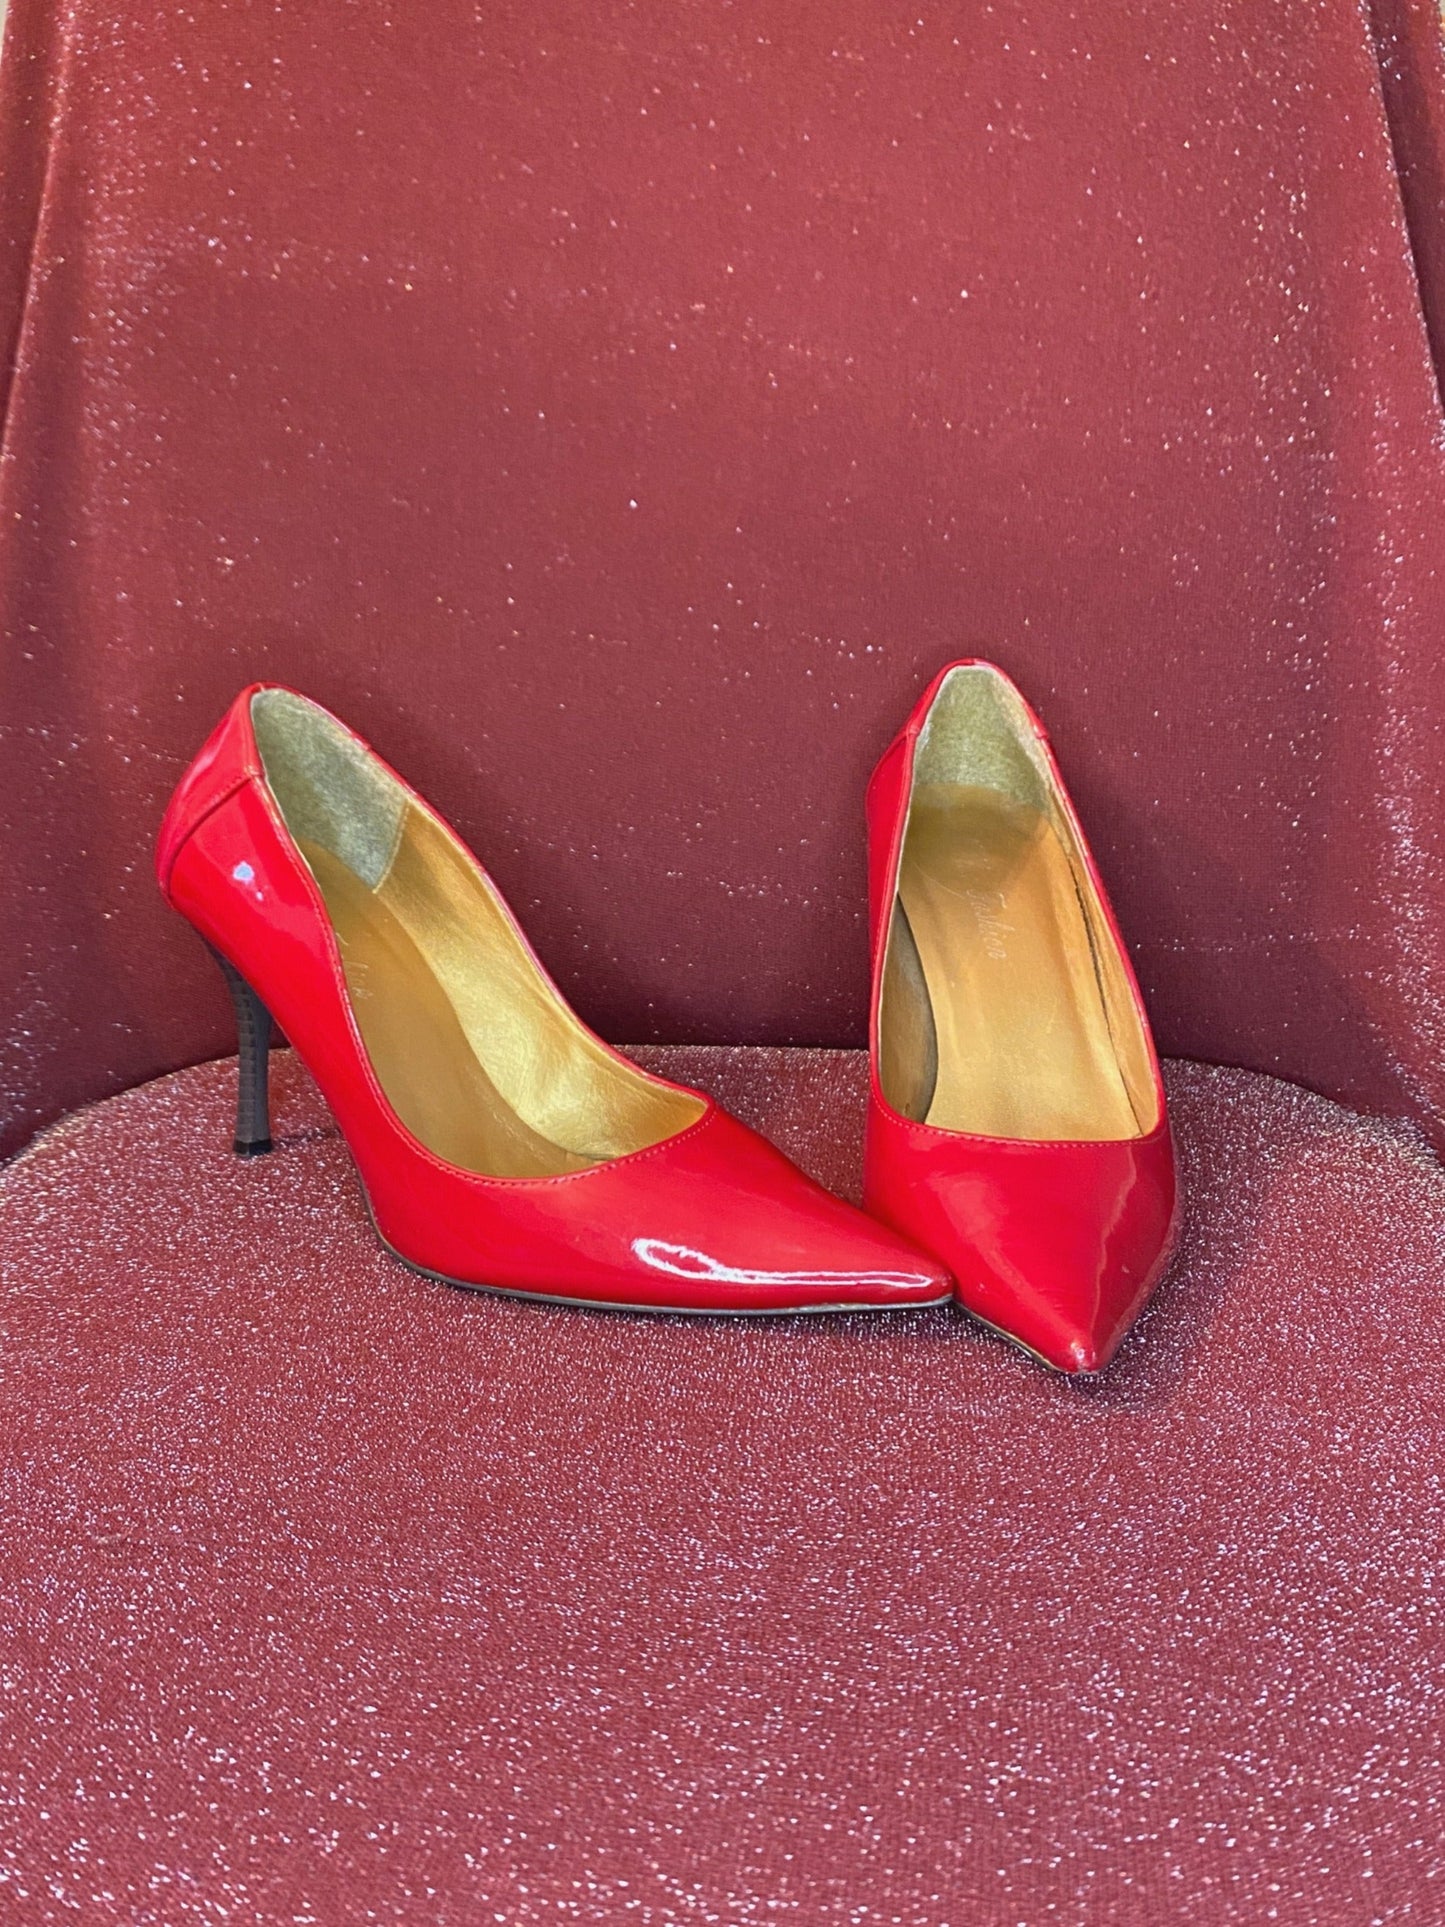 Red Patent Heels (Size 7.5)